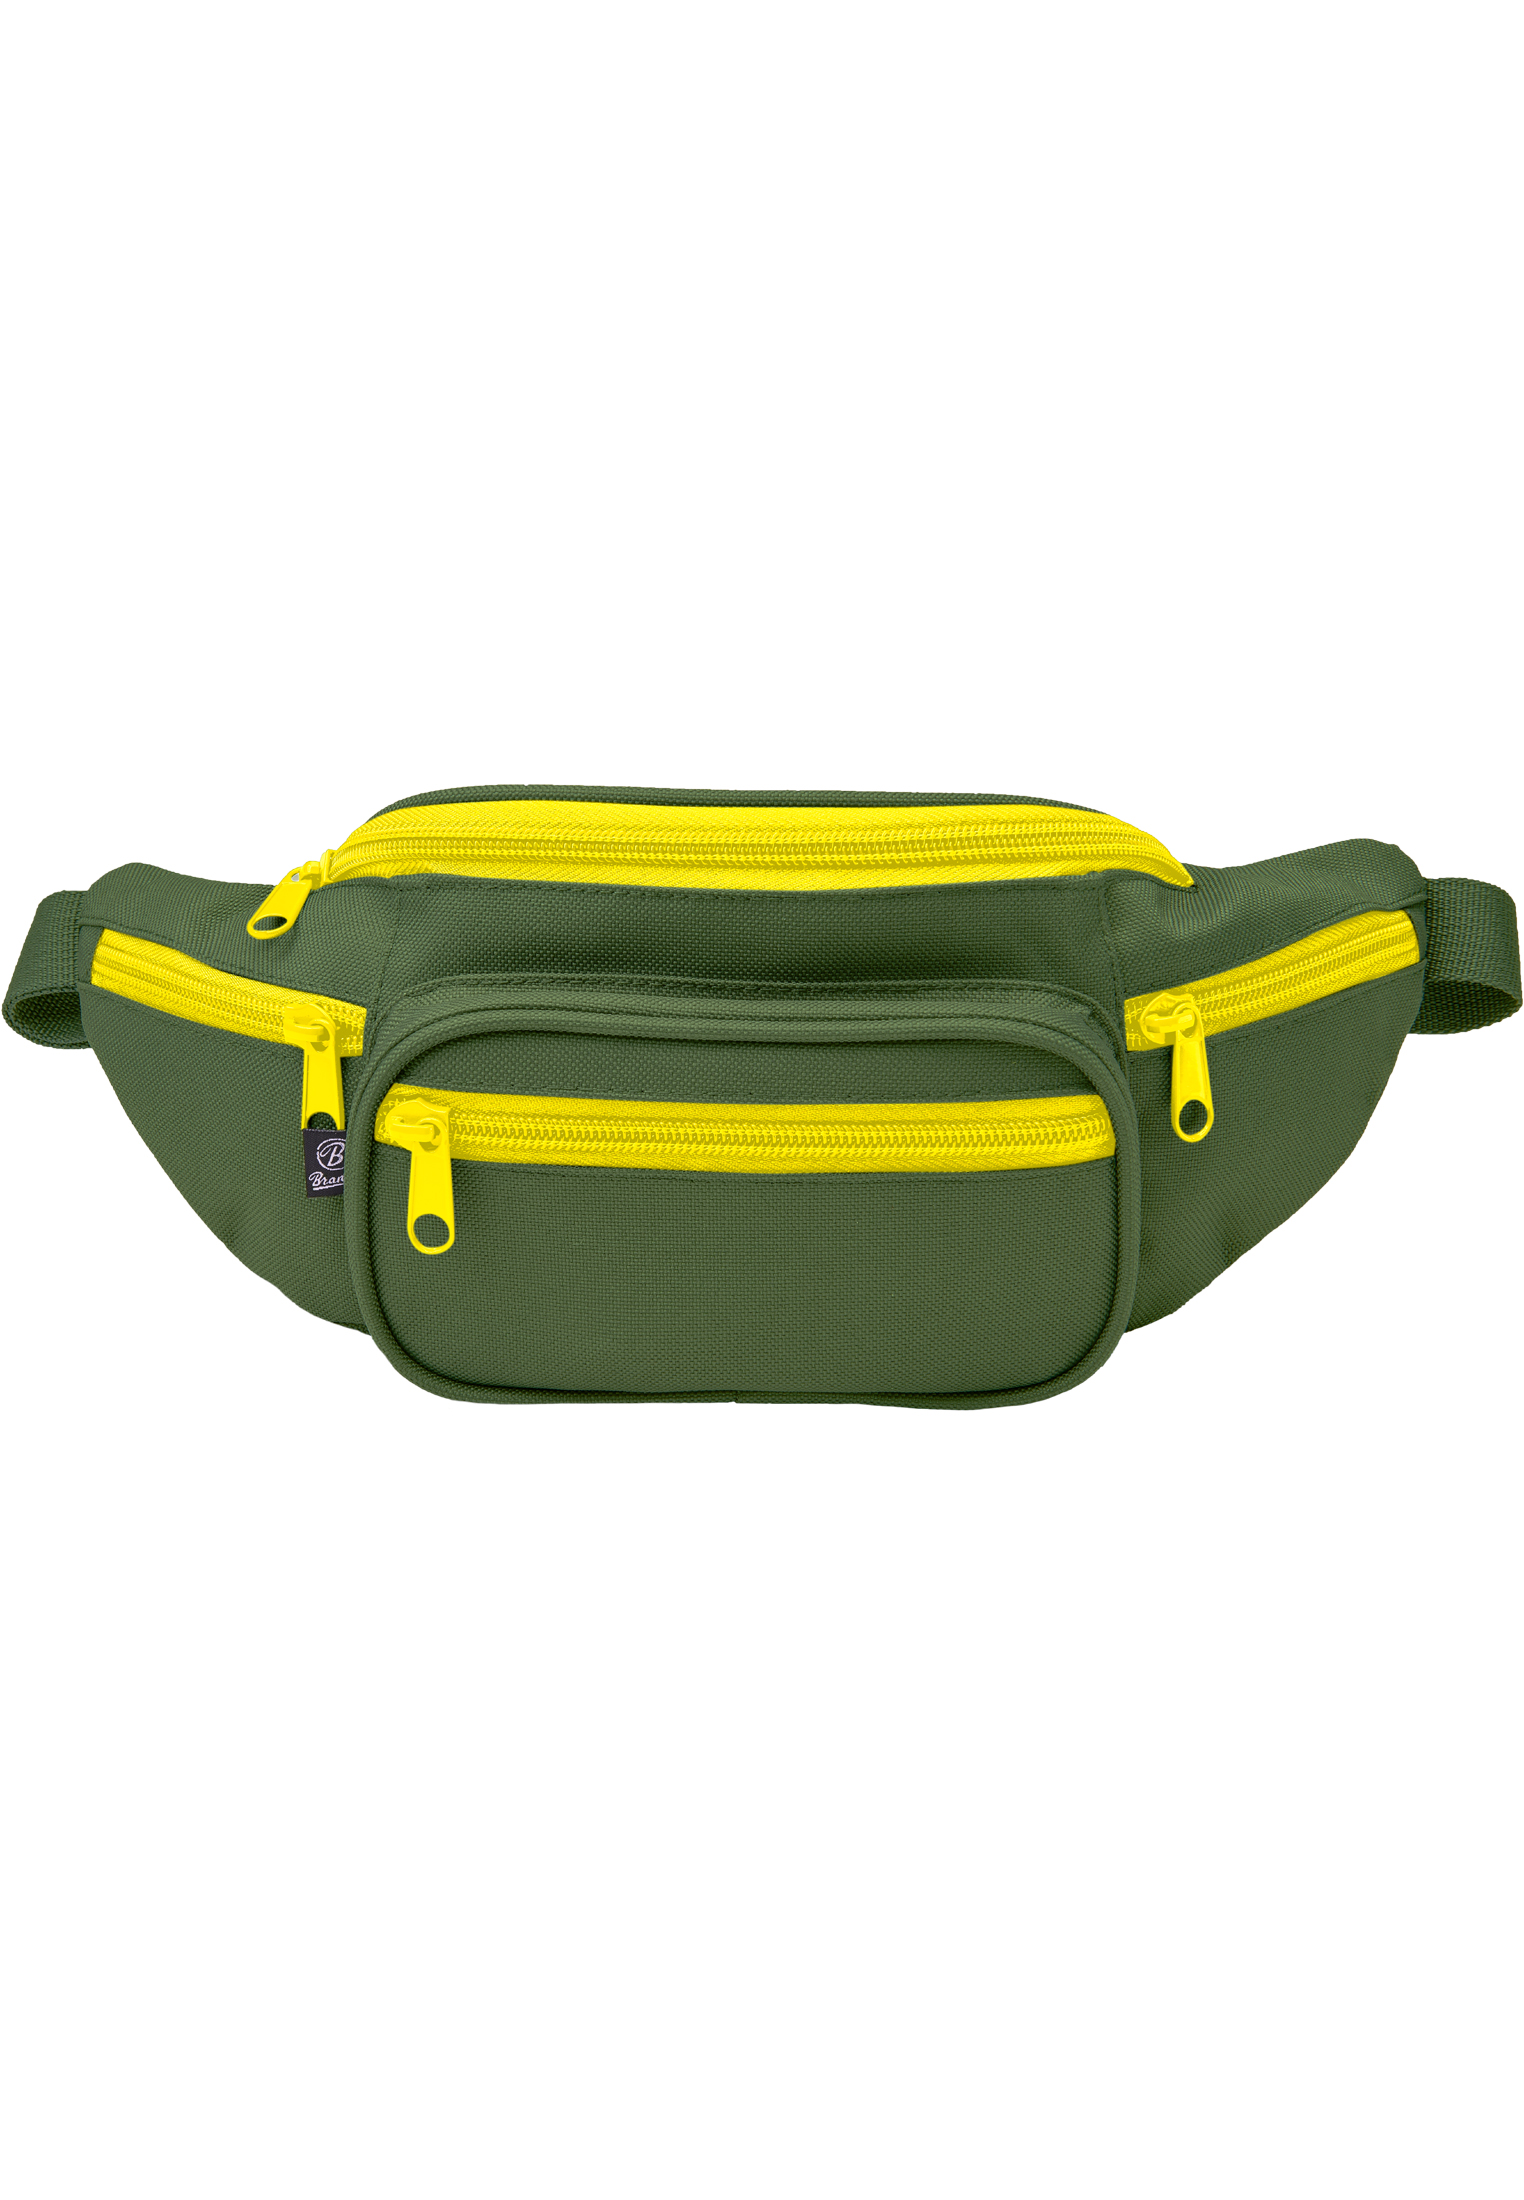 Taschen Pocket Hip Bag in Farbe olive/yellow